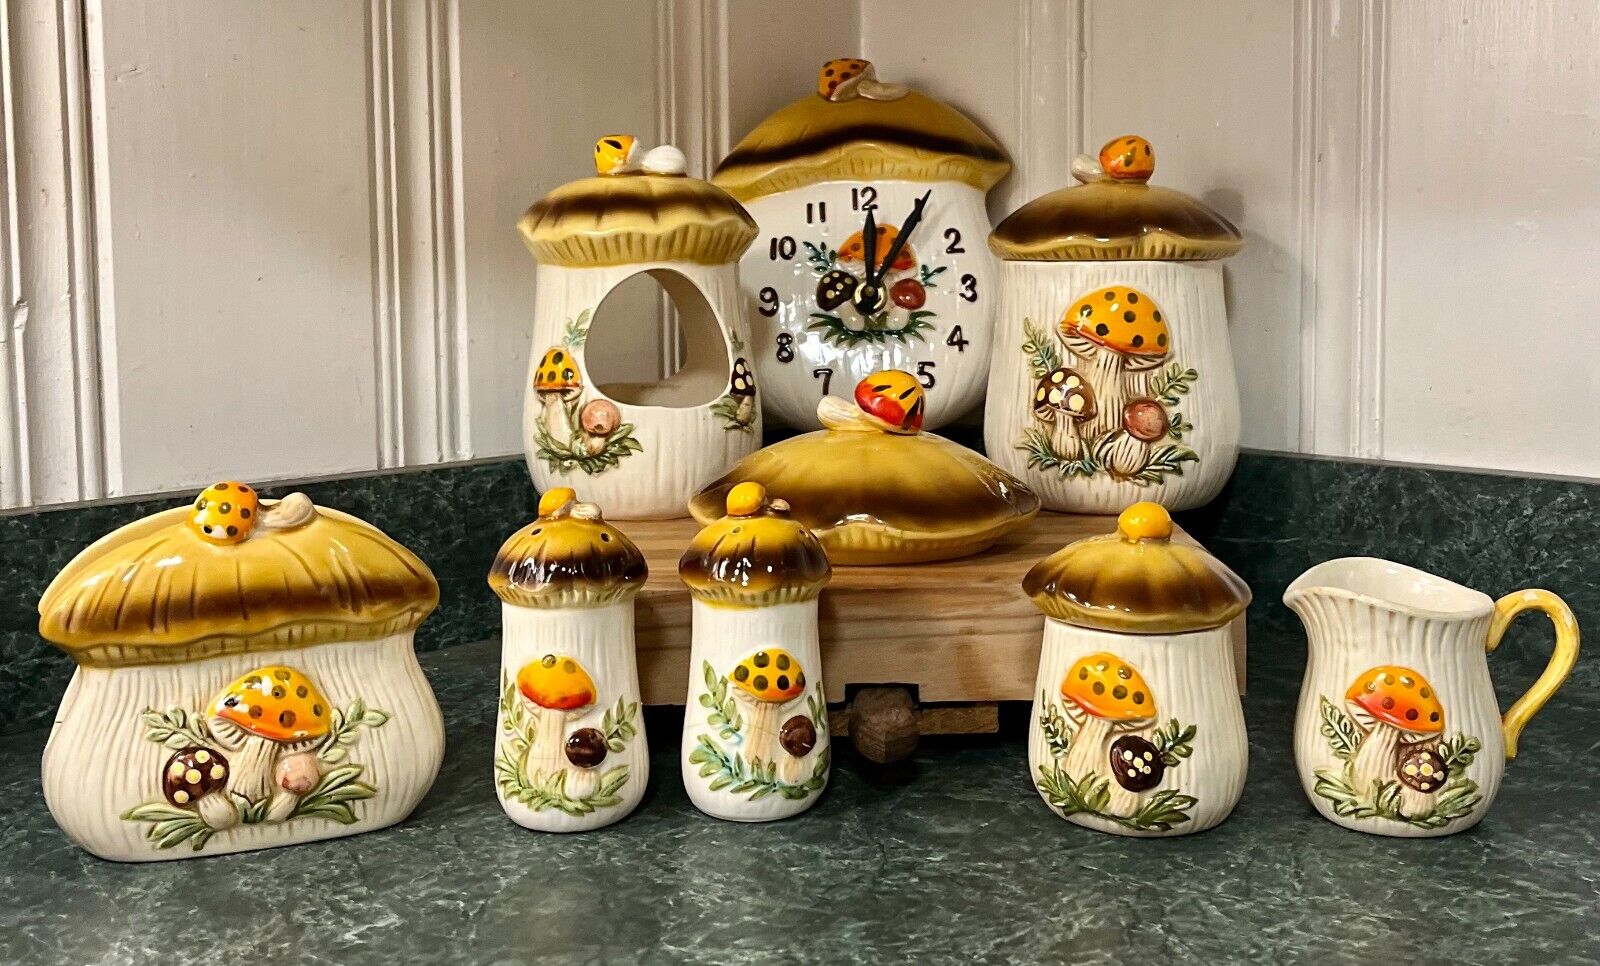 Rare Sears & Roebuck Merry Mushroom Kitchen Jar/ Canister Set from the 70’s